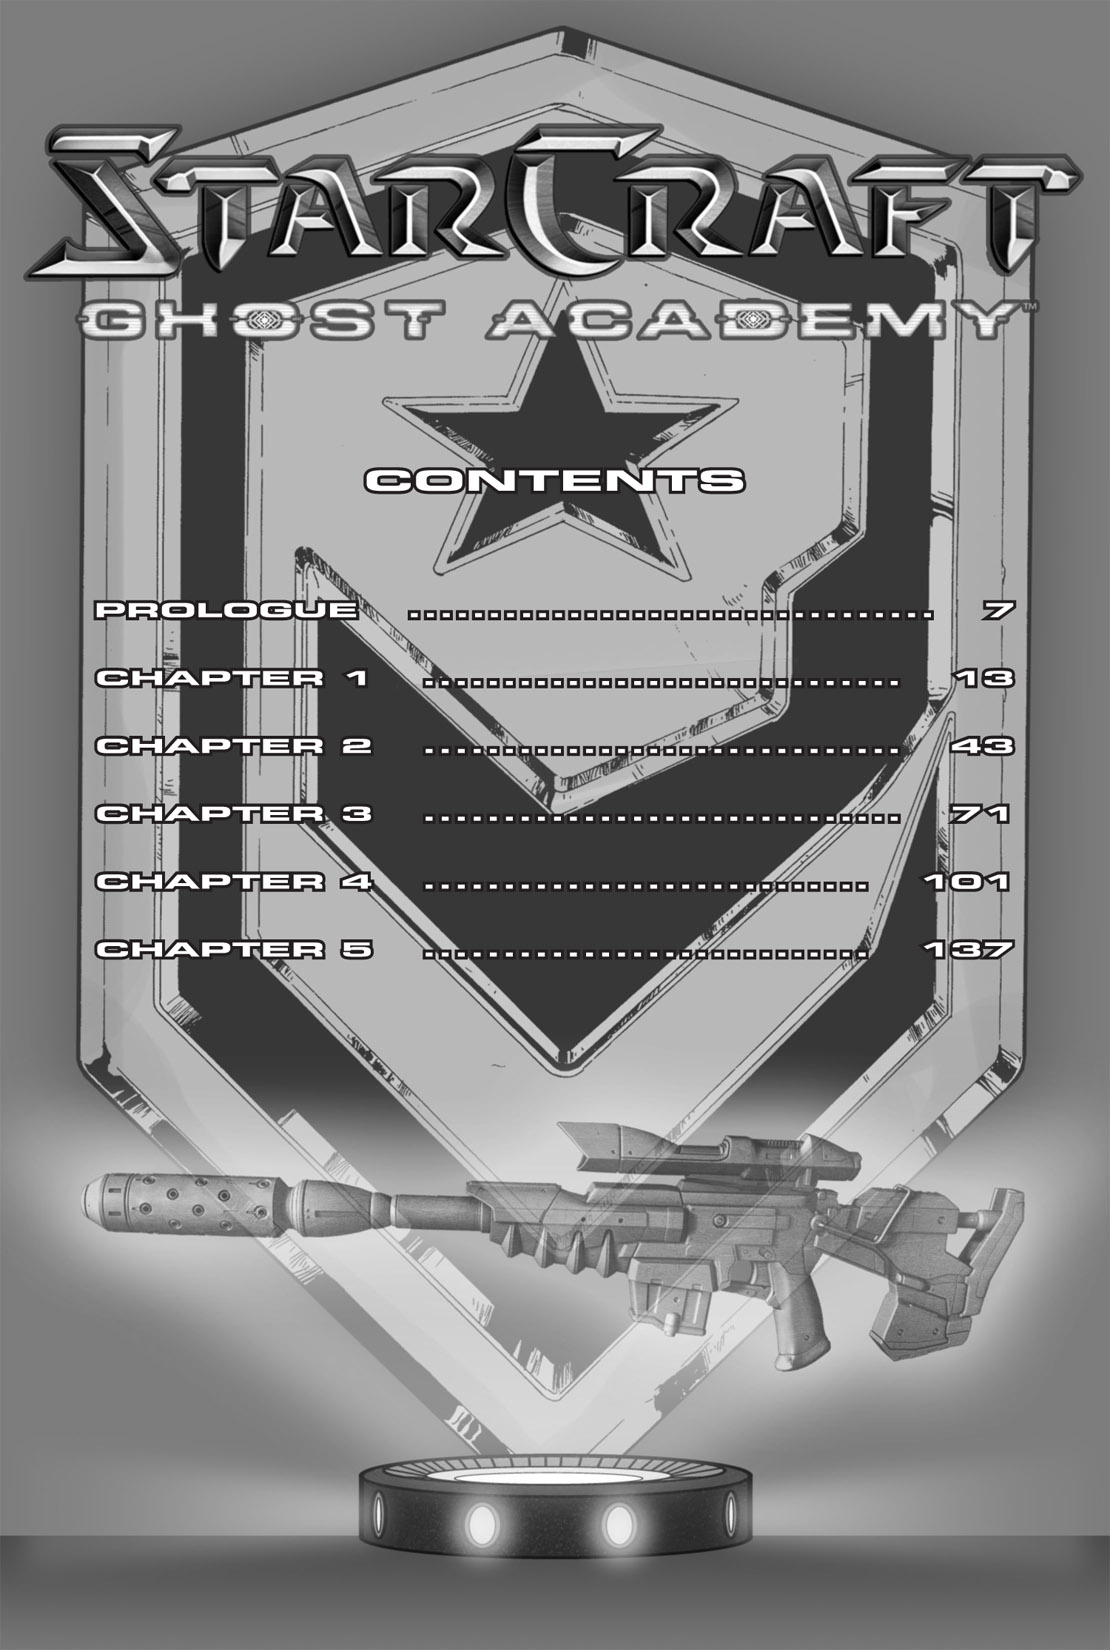 Read online StarCraft: Ghost Academy comic -  Issue # TPB 2 - 6